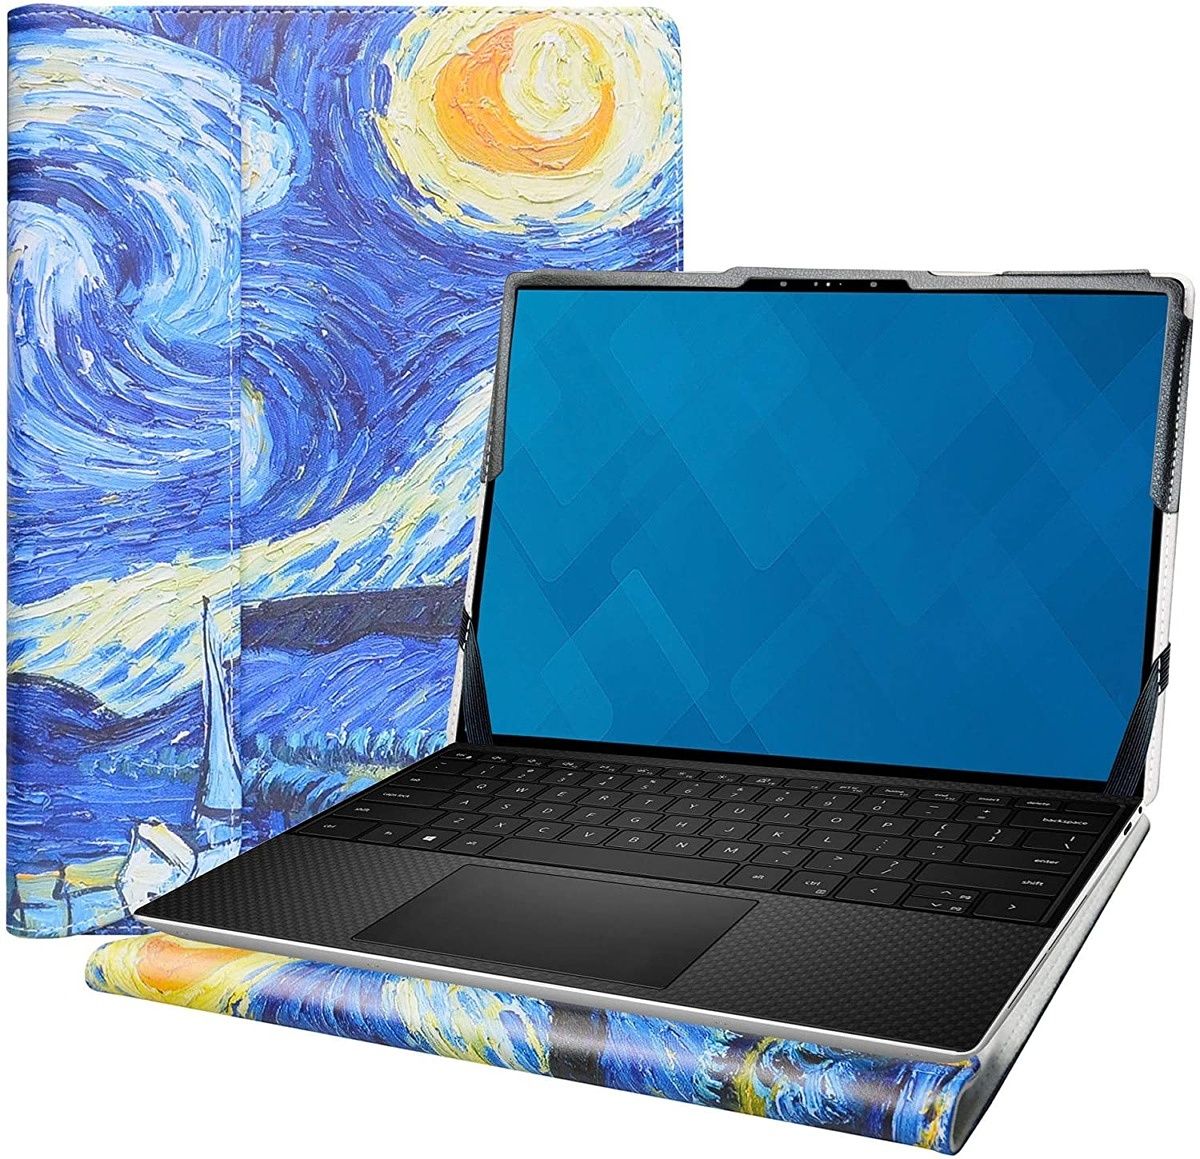 The Alapmk Protective Cover Case wraps around the Dell XPS 13 to keep it protected whether it's open or closed. It's available with a few artistic designs, which can make it feel a lot more personal.